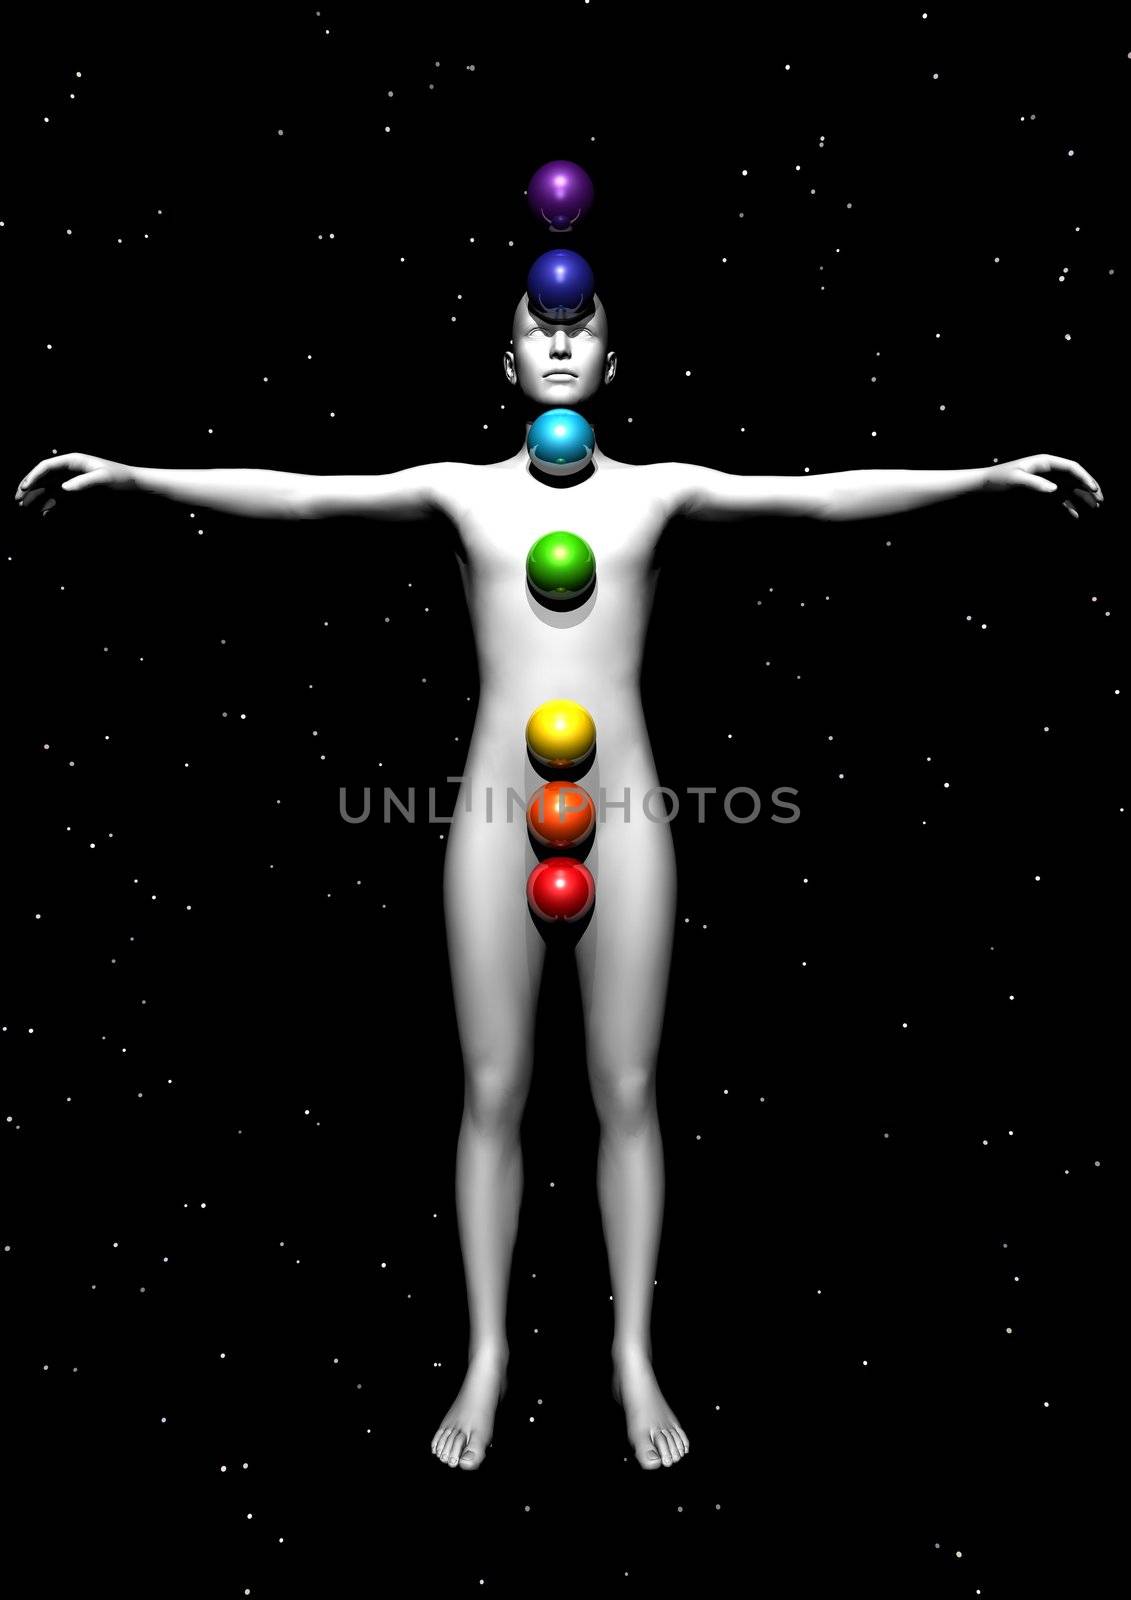 Human and chakras colors by Elenaphotos21